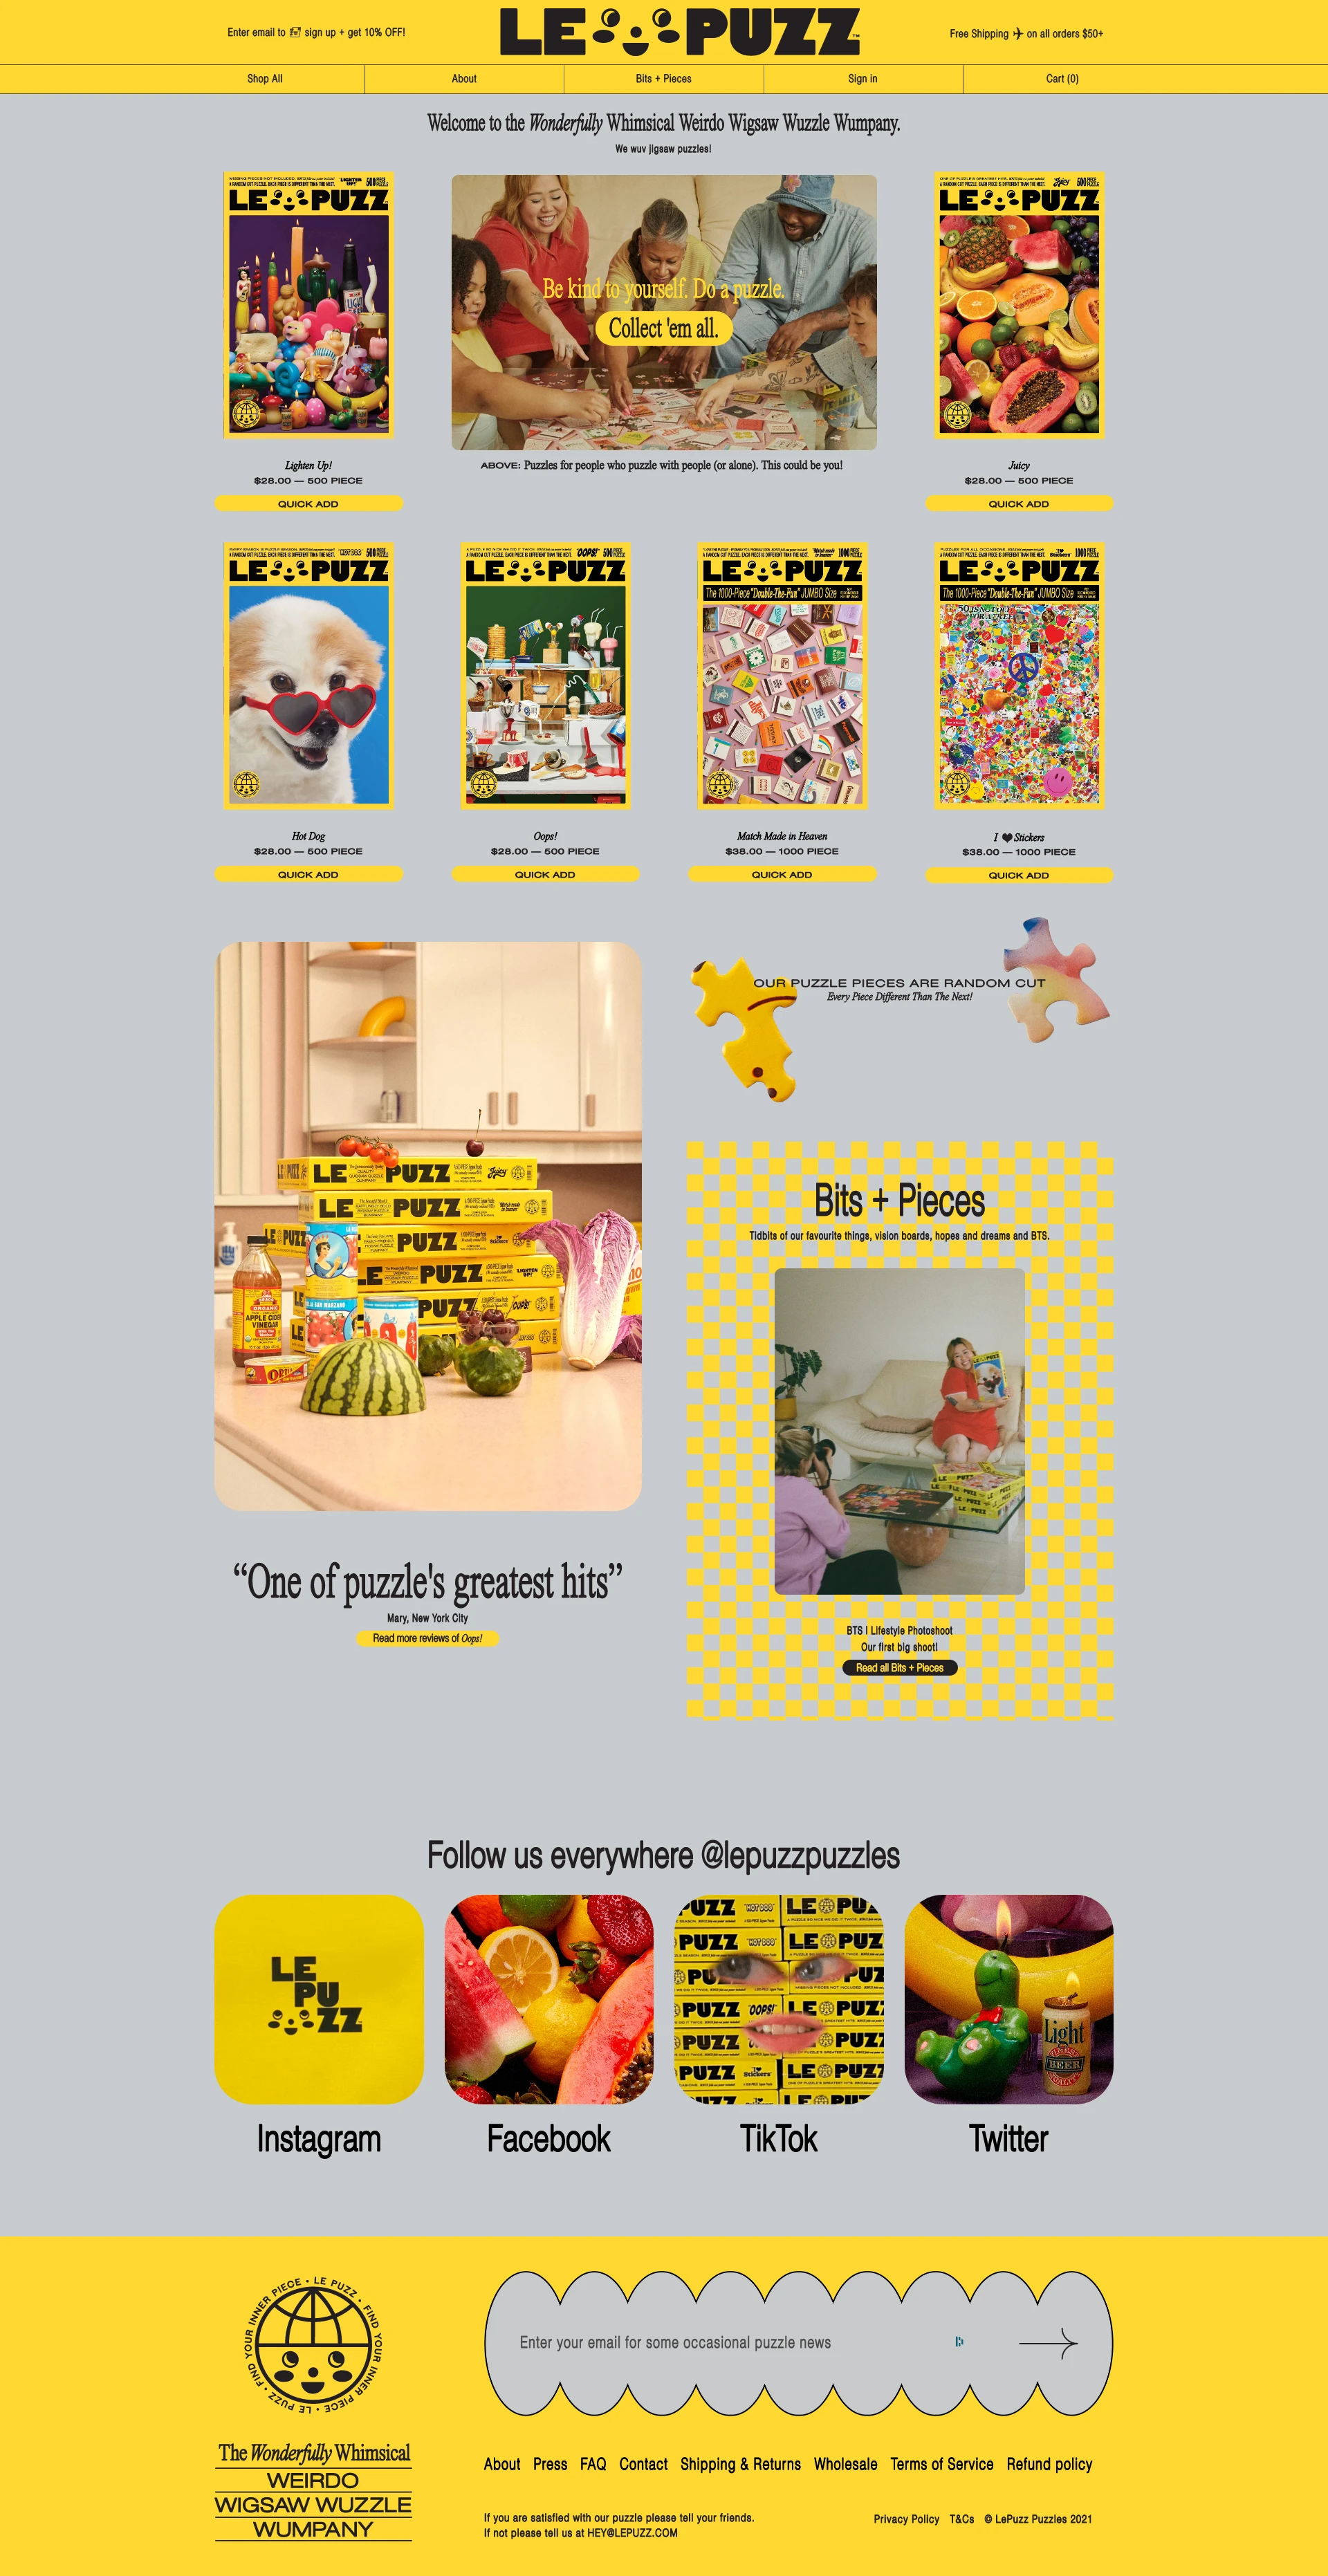 Le Puzz Landing Page Example: We’re Le Puzz and we love jigsaw puzzles! We collect them, we do them with friends and family, we give them away and trade them when we’re finished. We especially love collecting vintage puzzles from the 60s, 70s and 80s with an odd sense of humor.